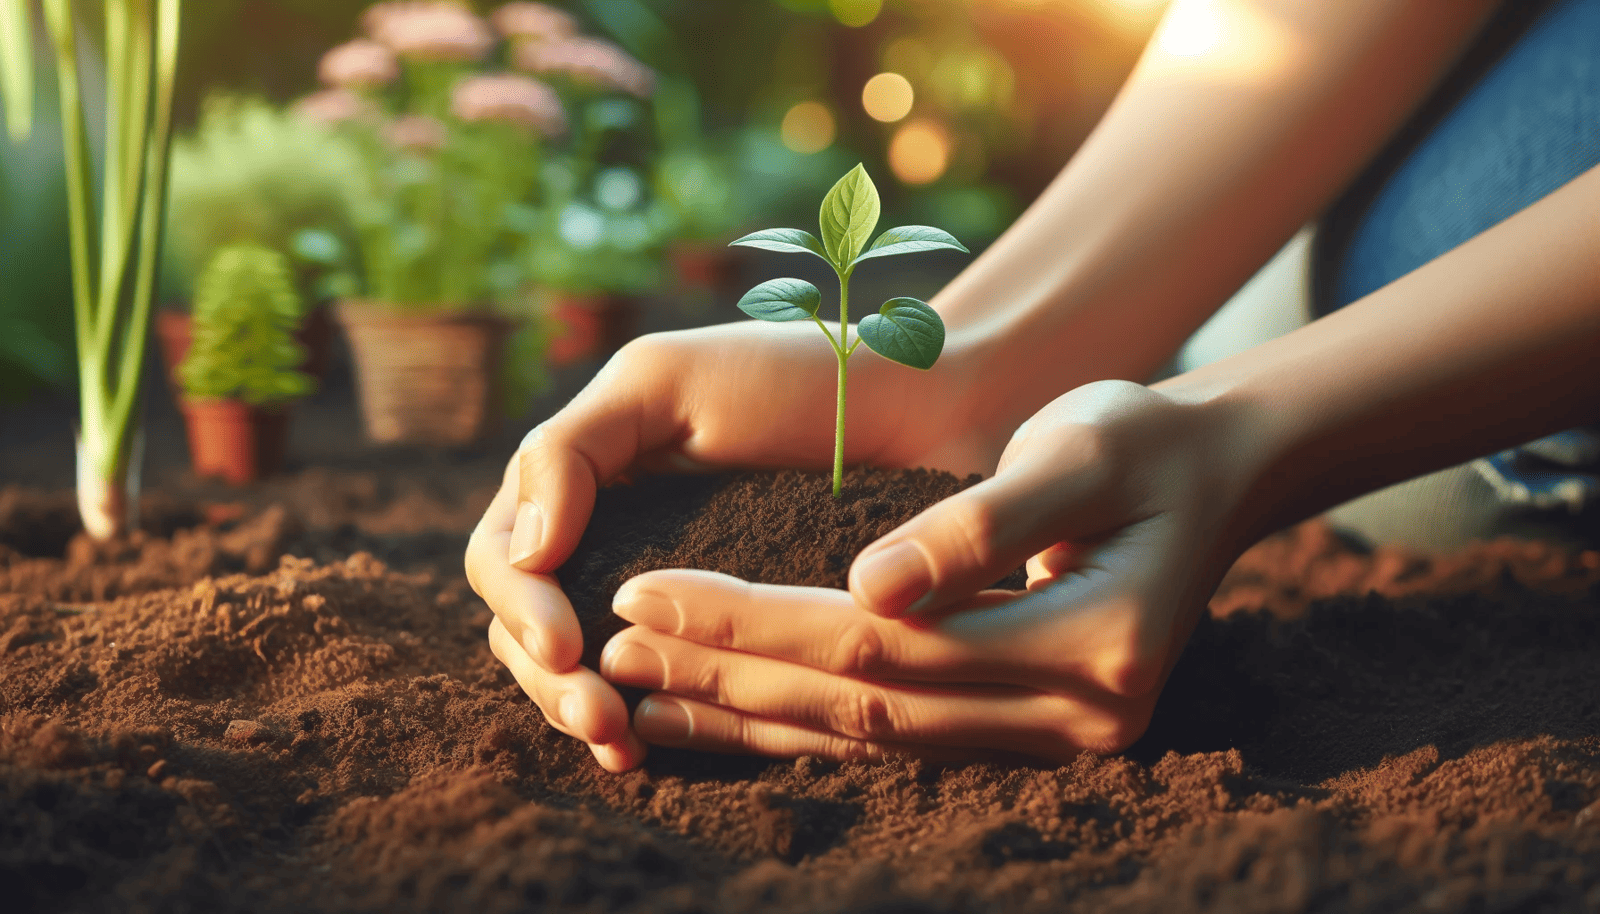 Hands nurturing a young plant in soil